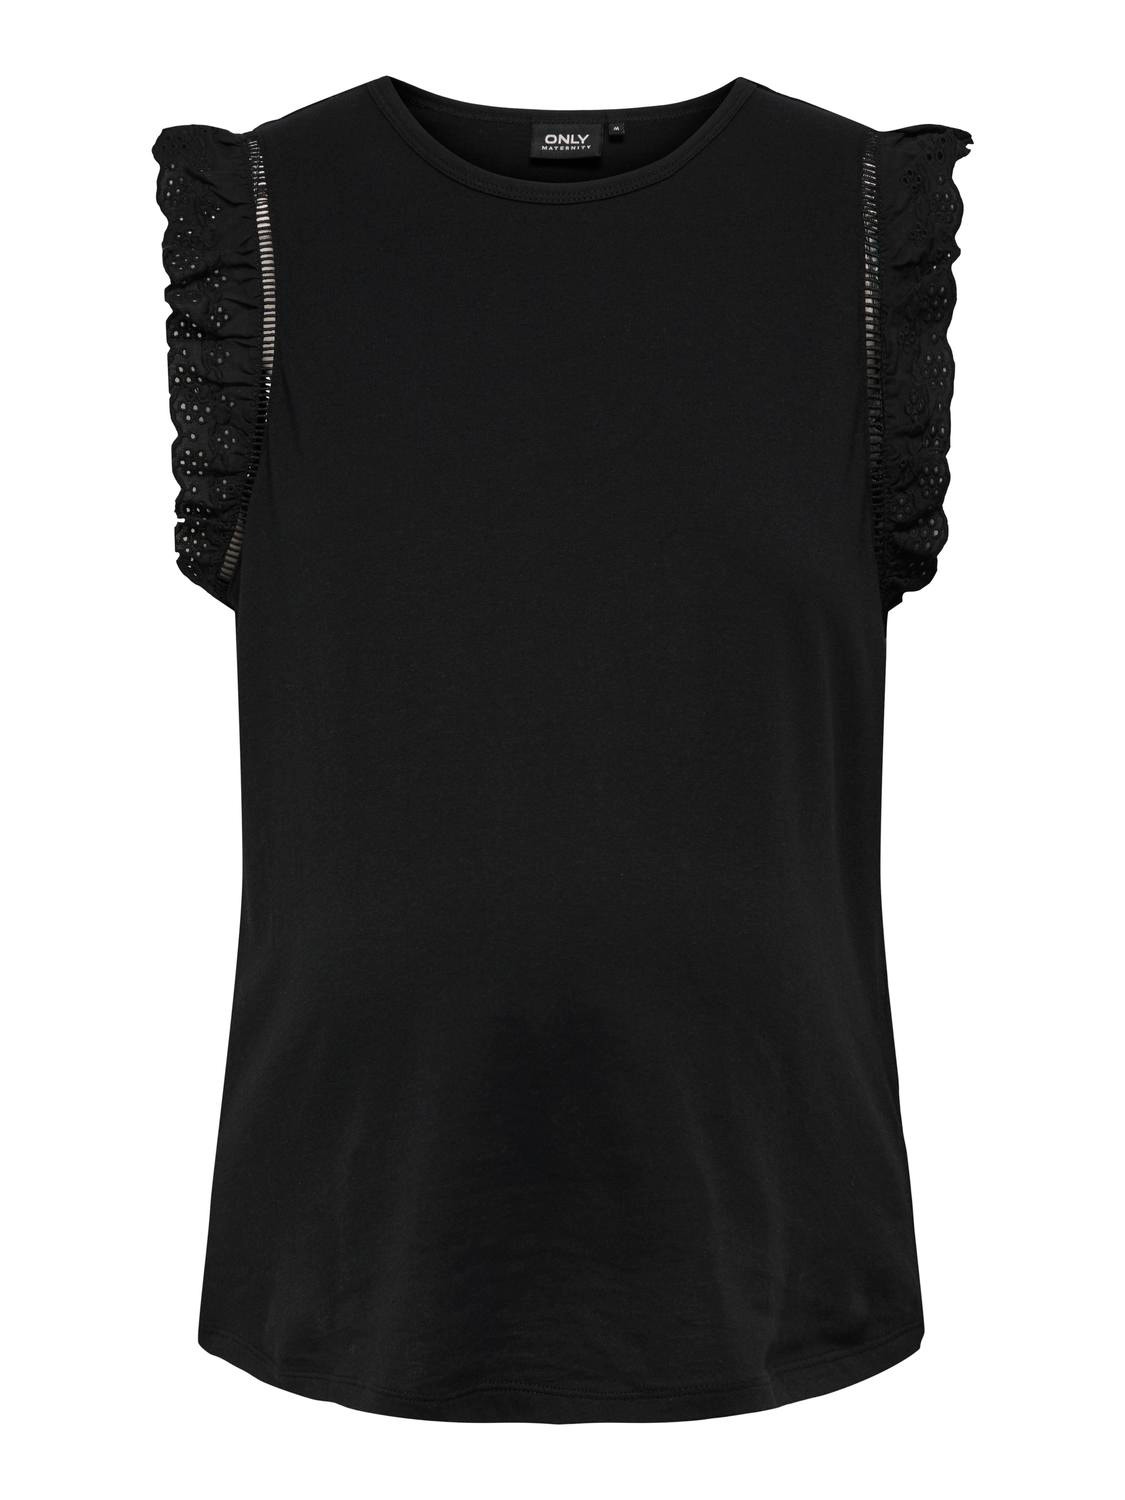 ONLY Mama frill top -Black - 15304018